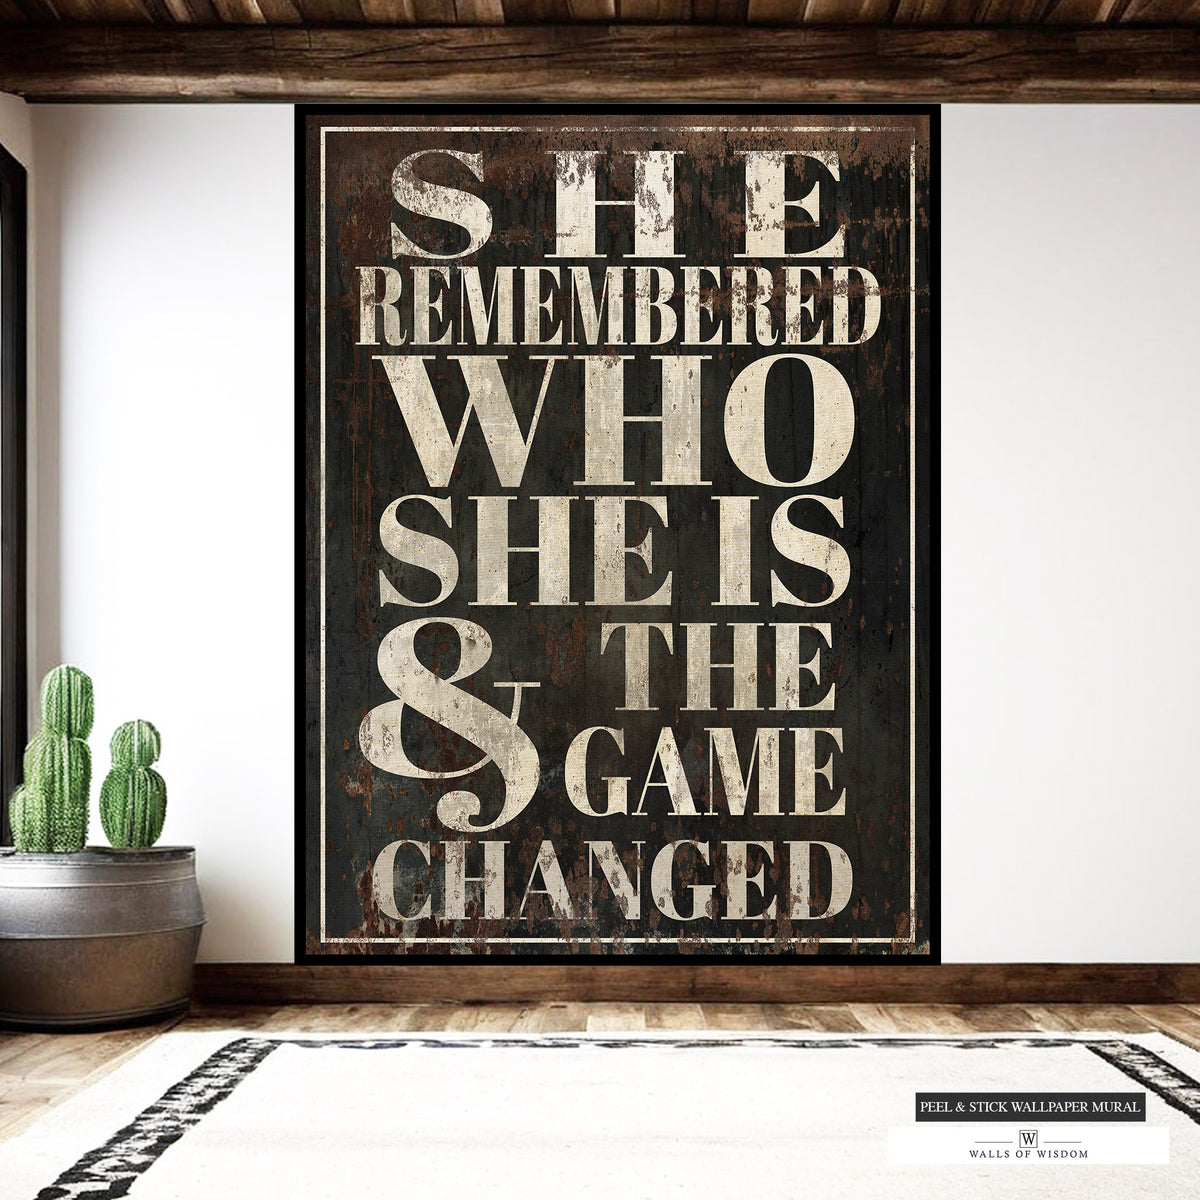 Woman empowerment quote wallpaper, perfect for living rooms or bedrooms.